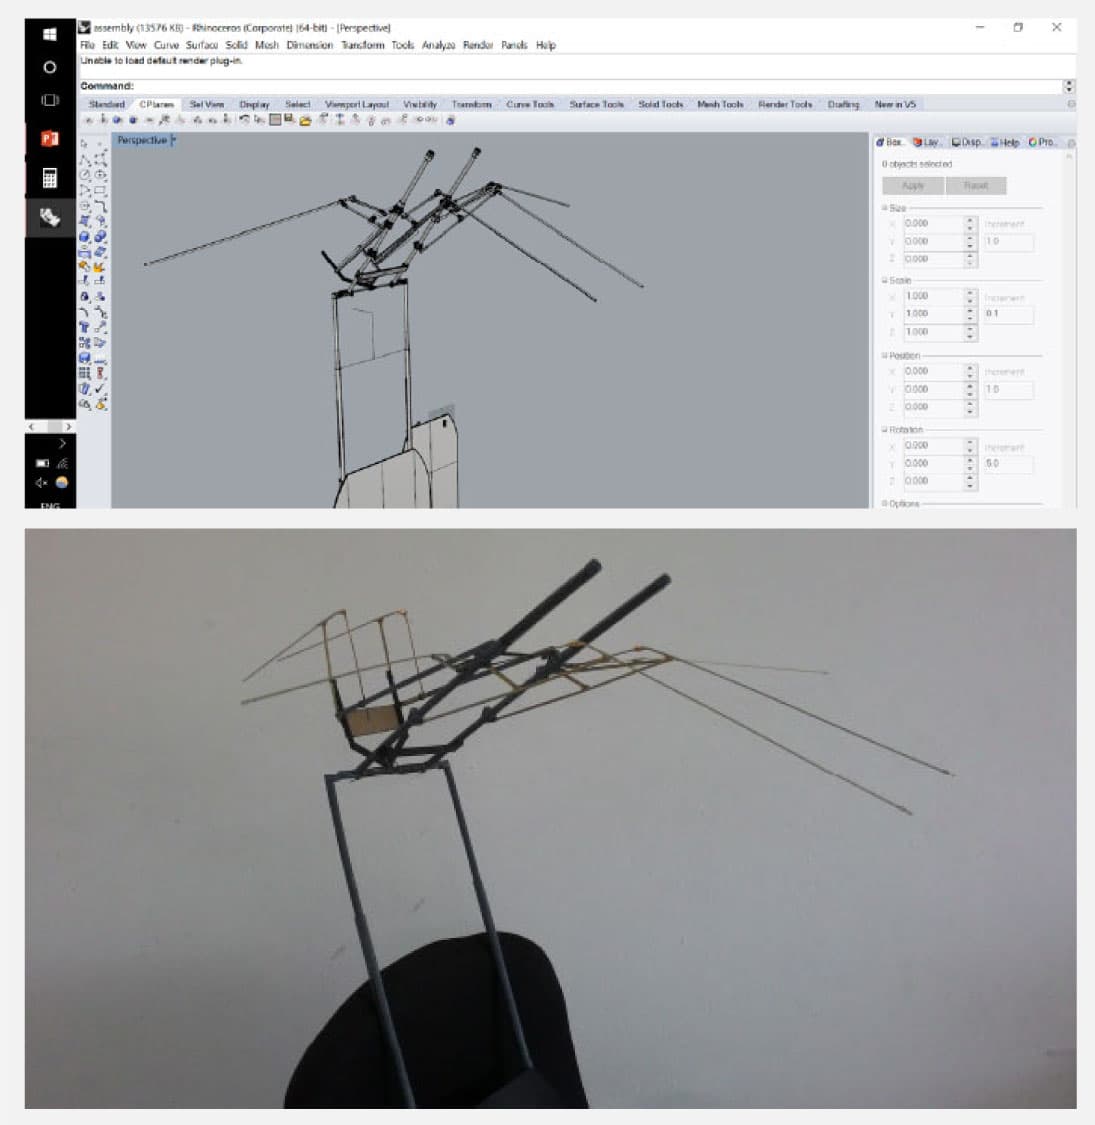 Modelling in Rhino, and the mock prototype built using umbrella parts and a few sticks.